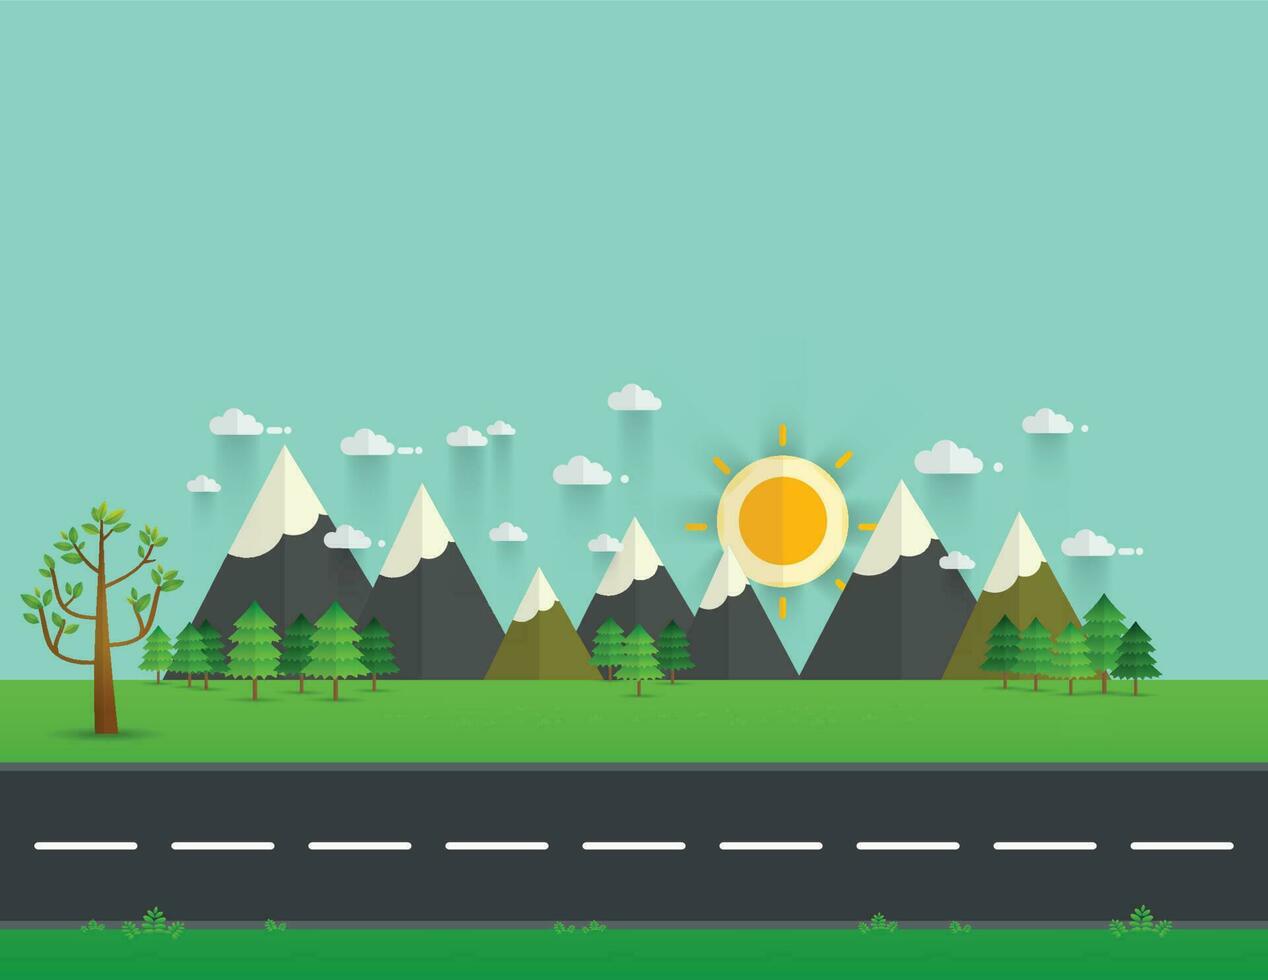 Road in green valley, mountains, hills, clouds and sun on the sky vector